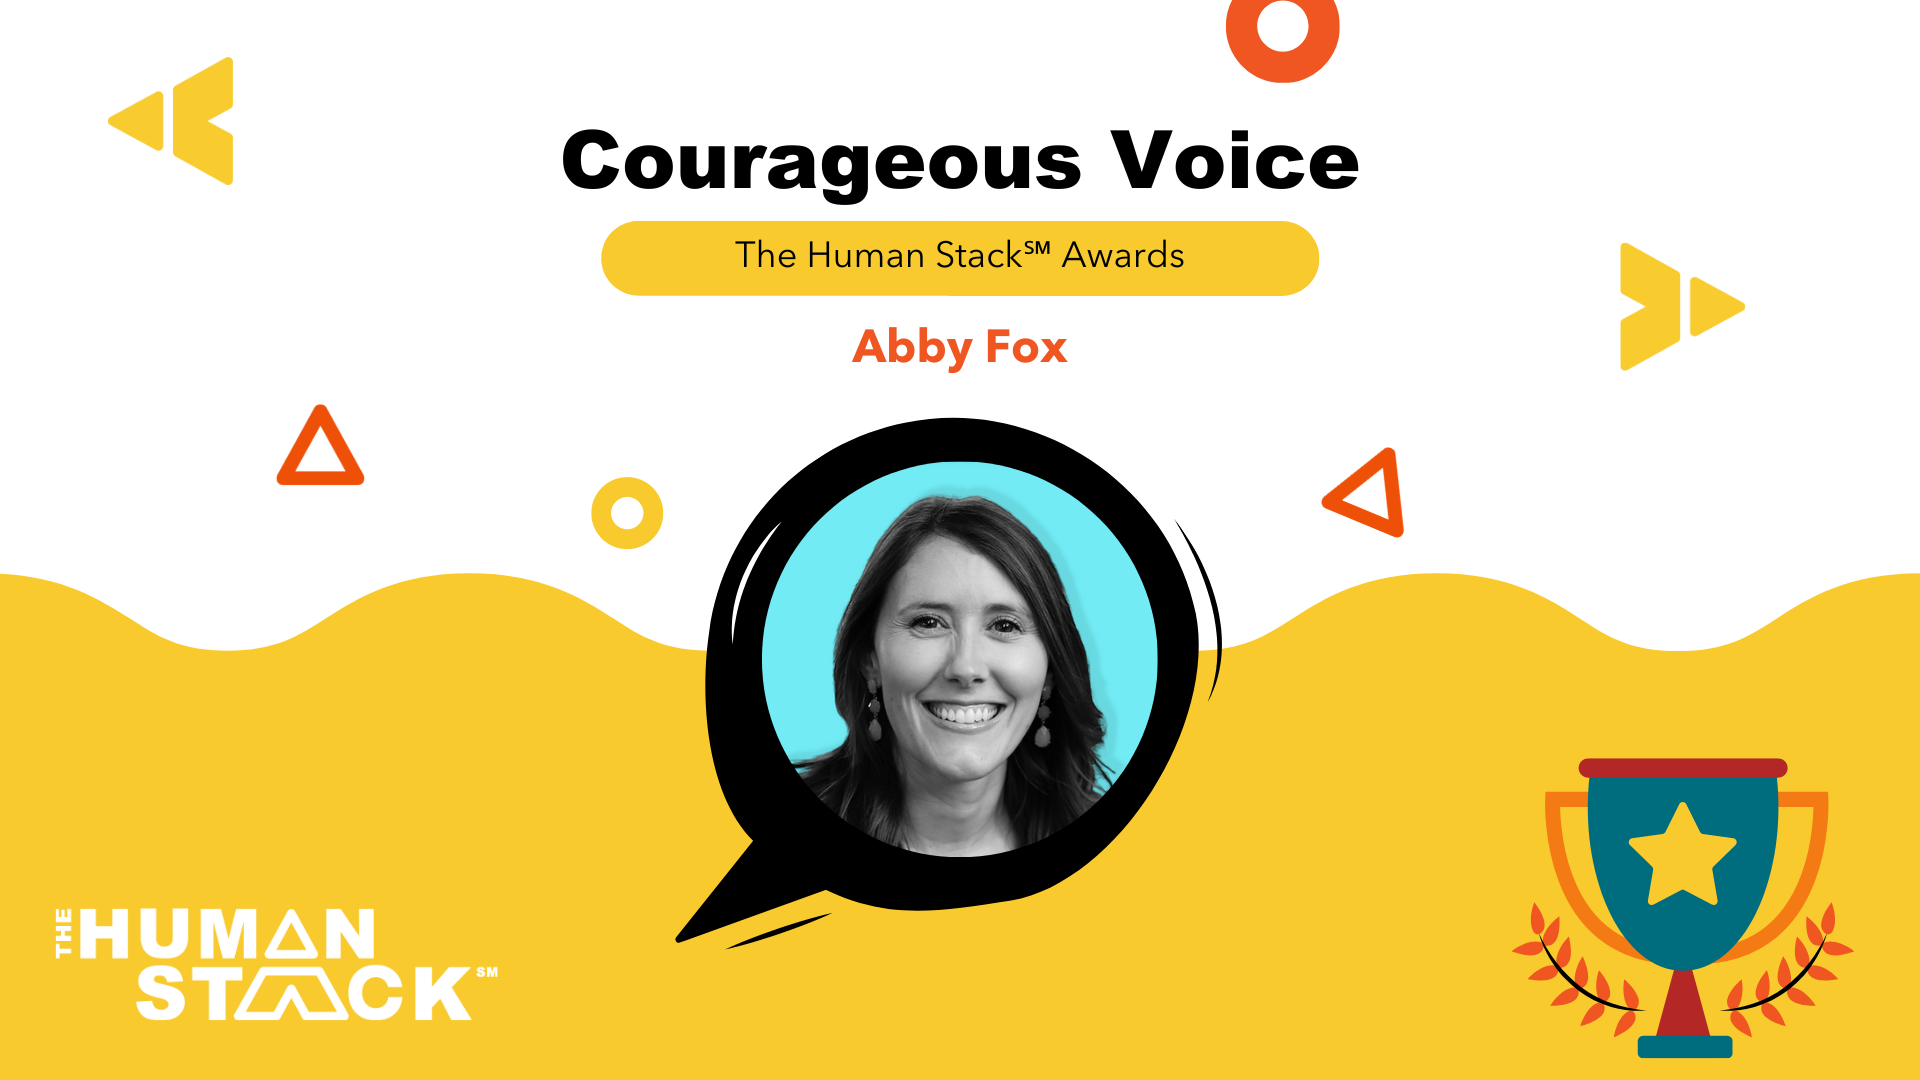 Abby Fox: Sinking in the gap between humanity and technology